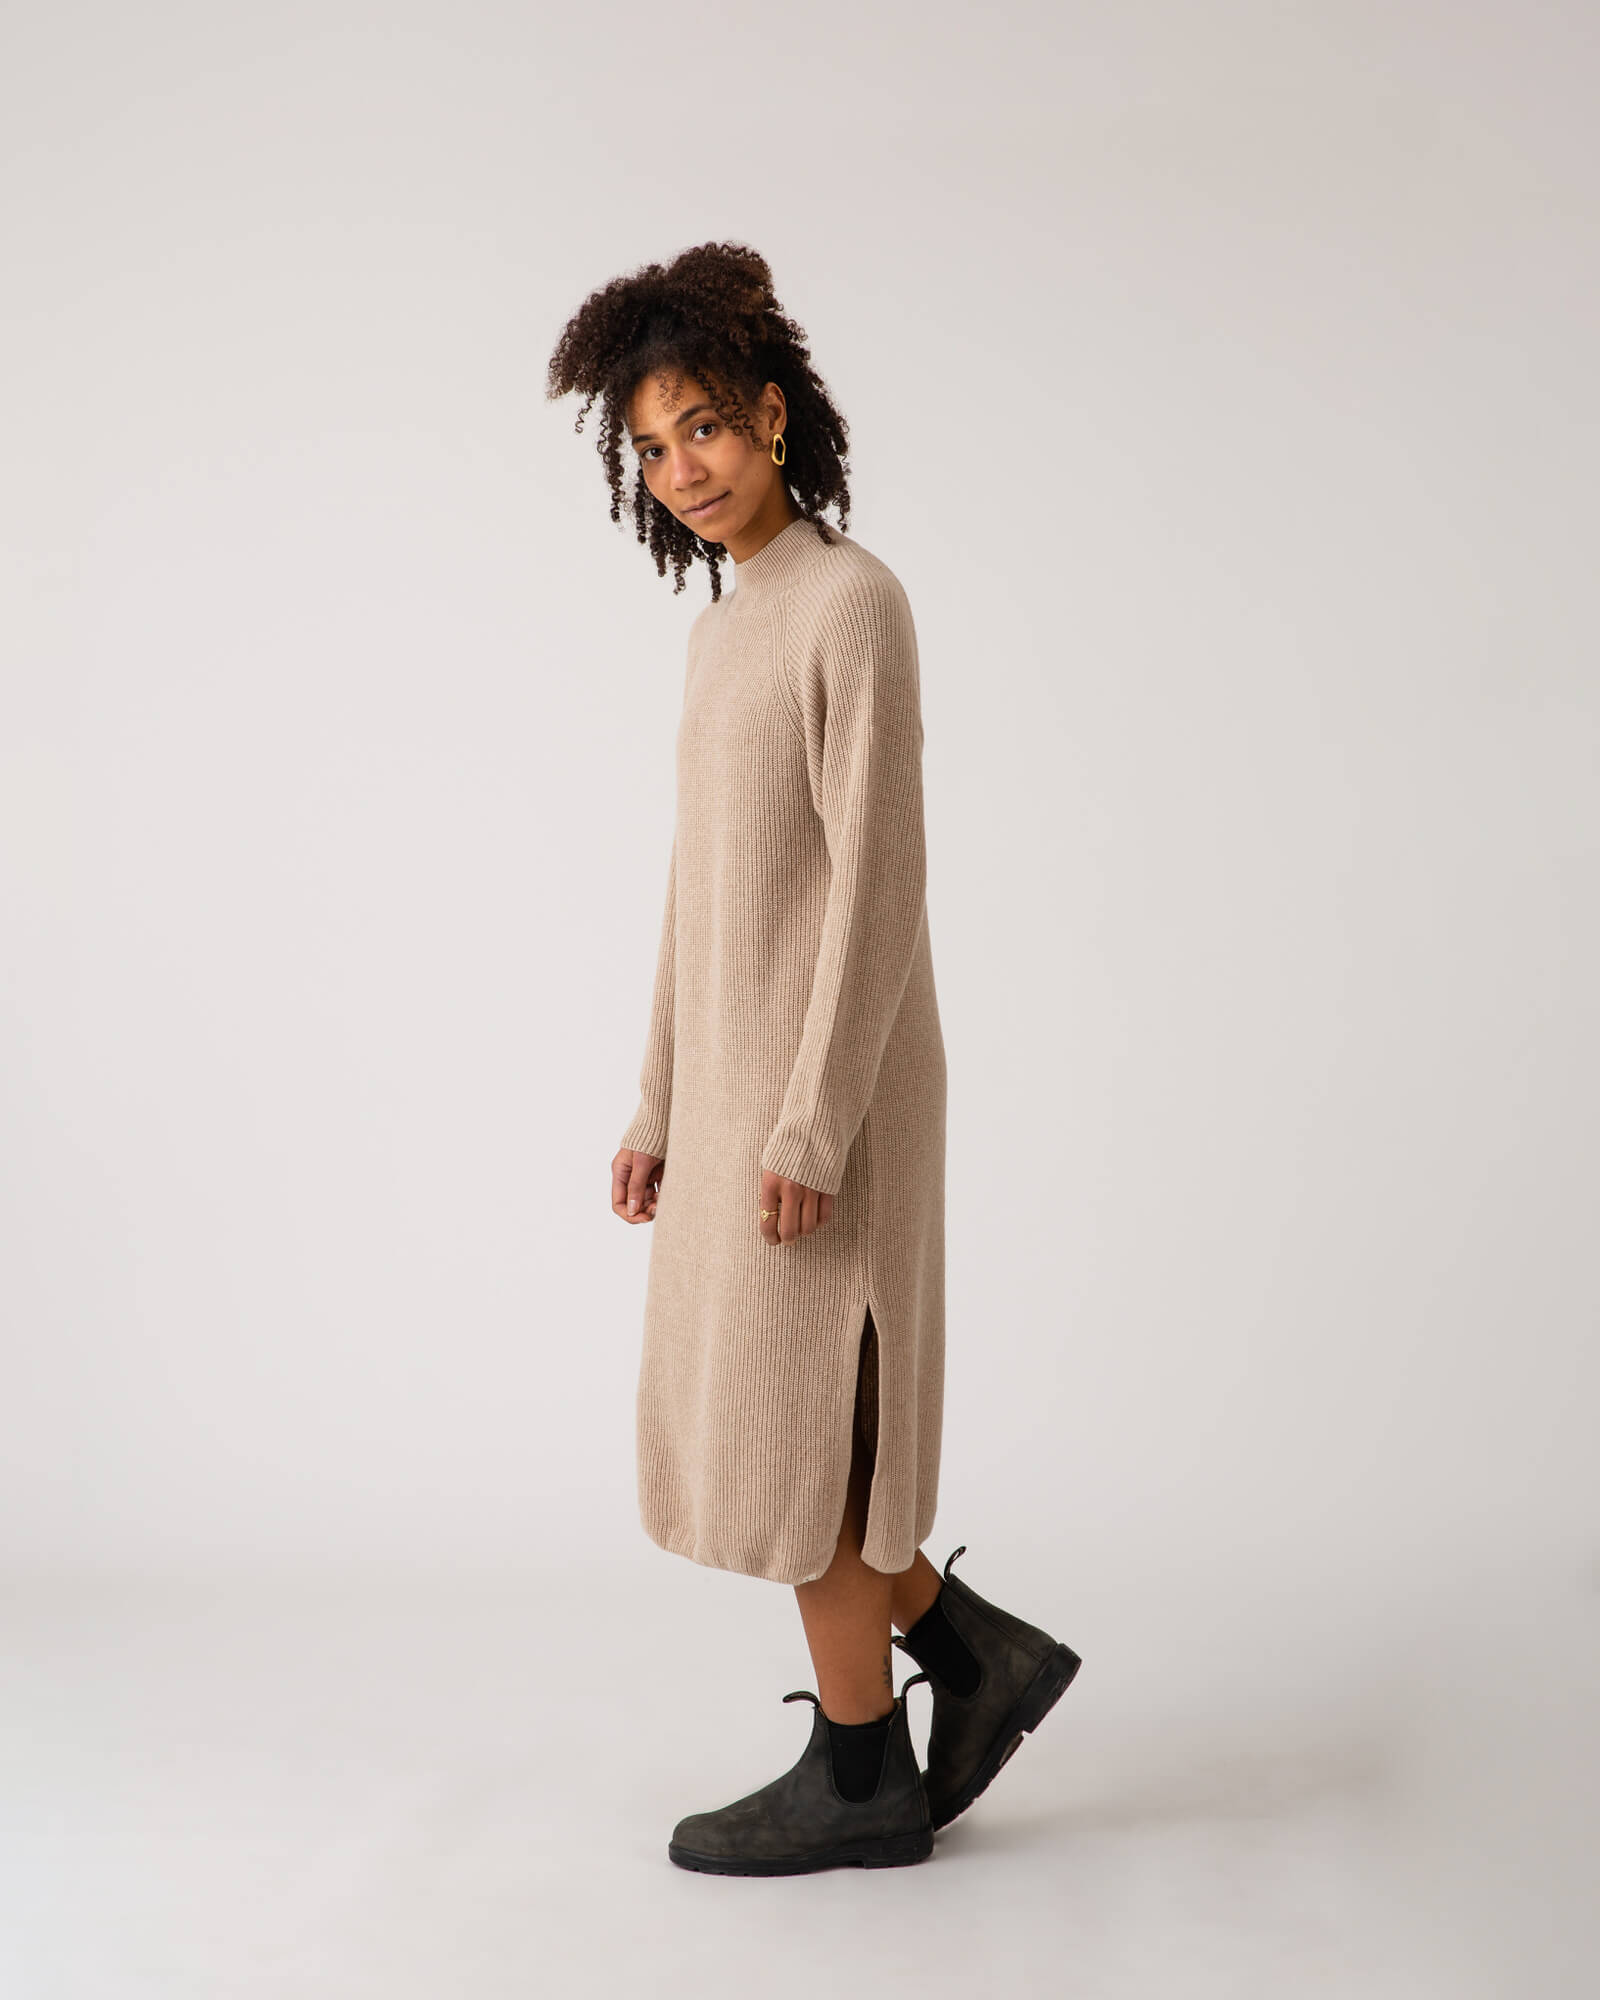 Light brown, knitted limestone dress made from recycled wool by Matona